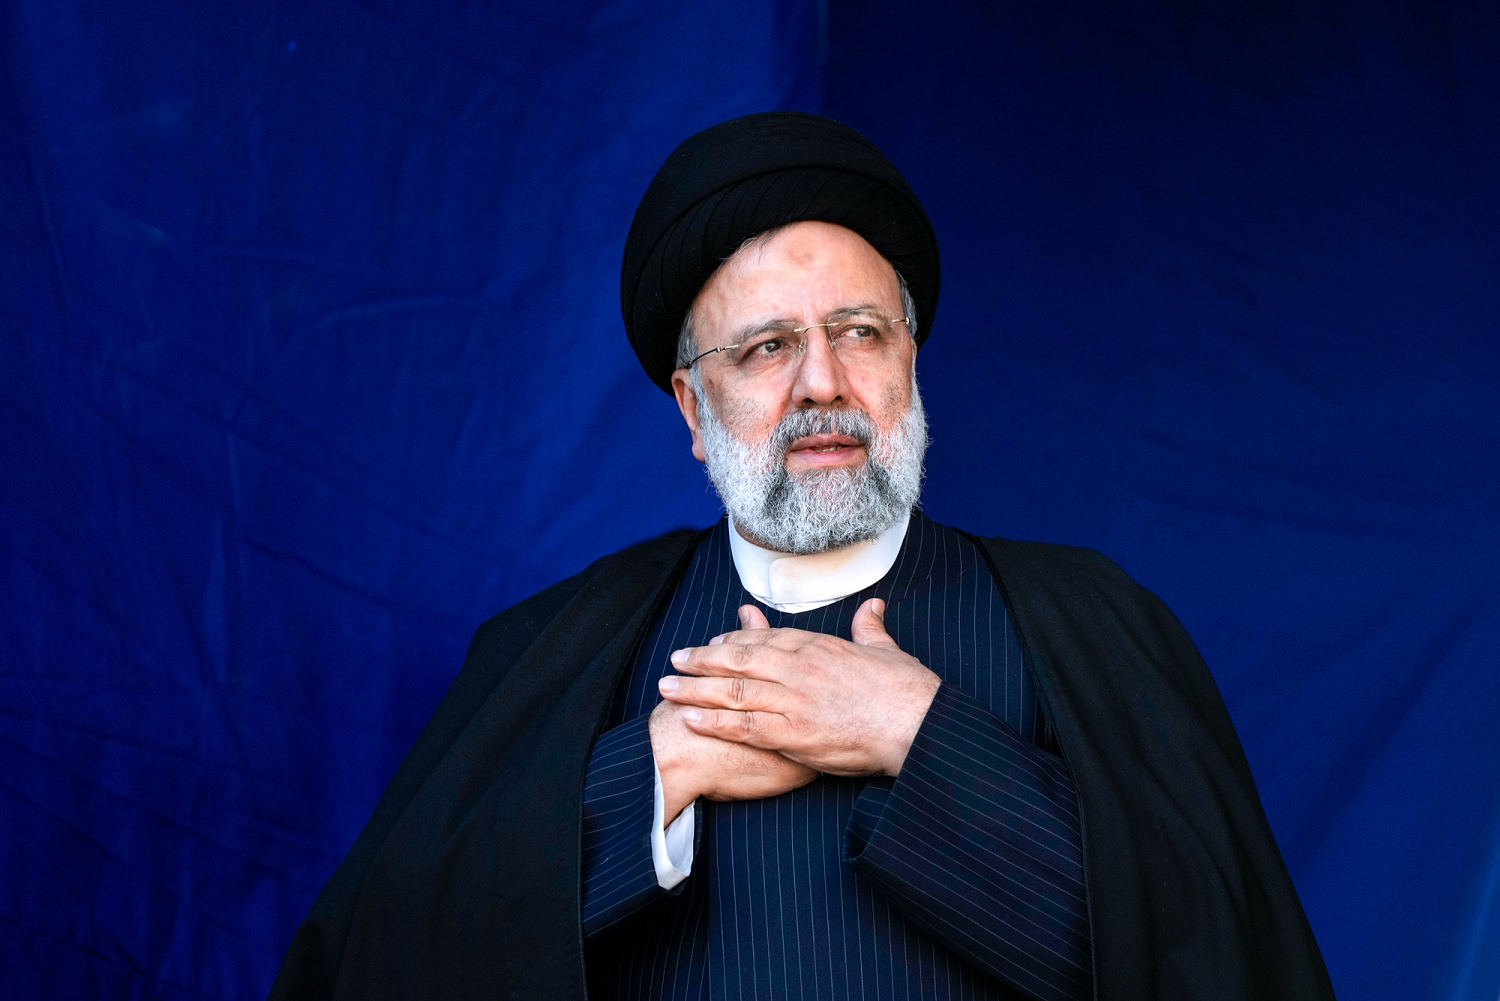 Foul play not currently suspected in death of Iran's president, U.S. official says